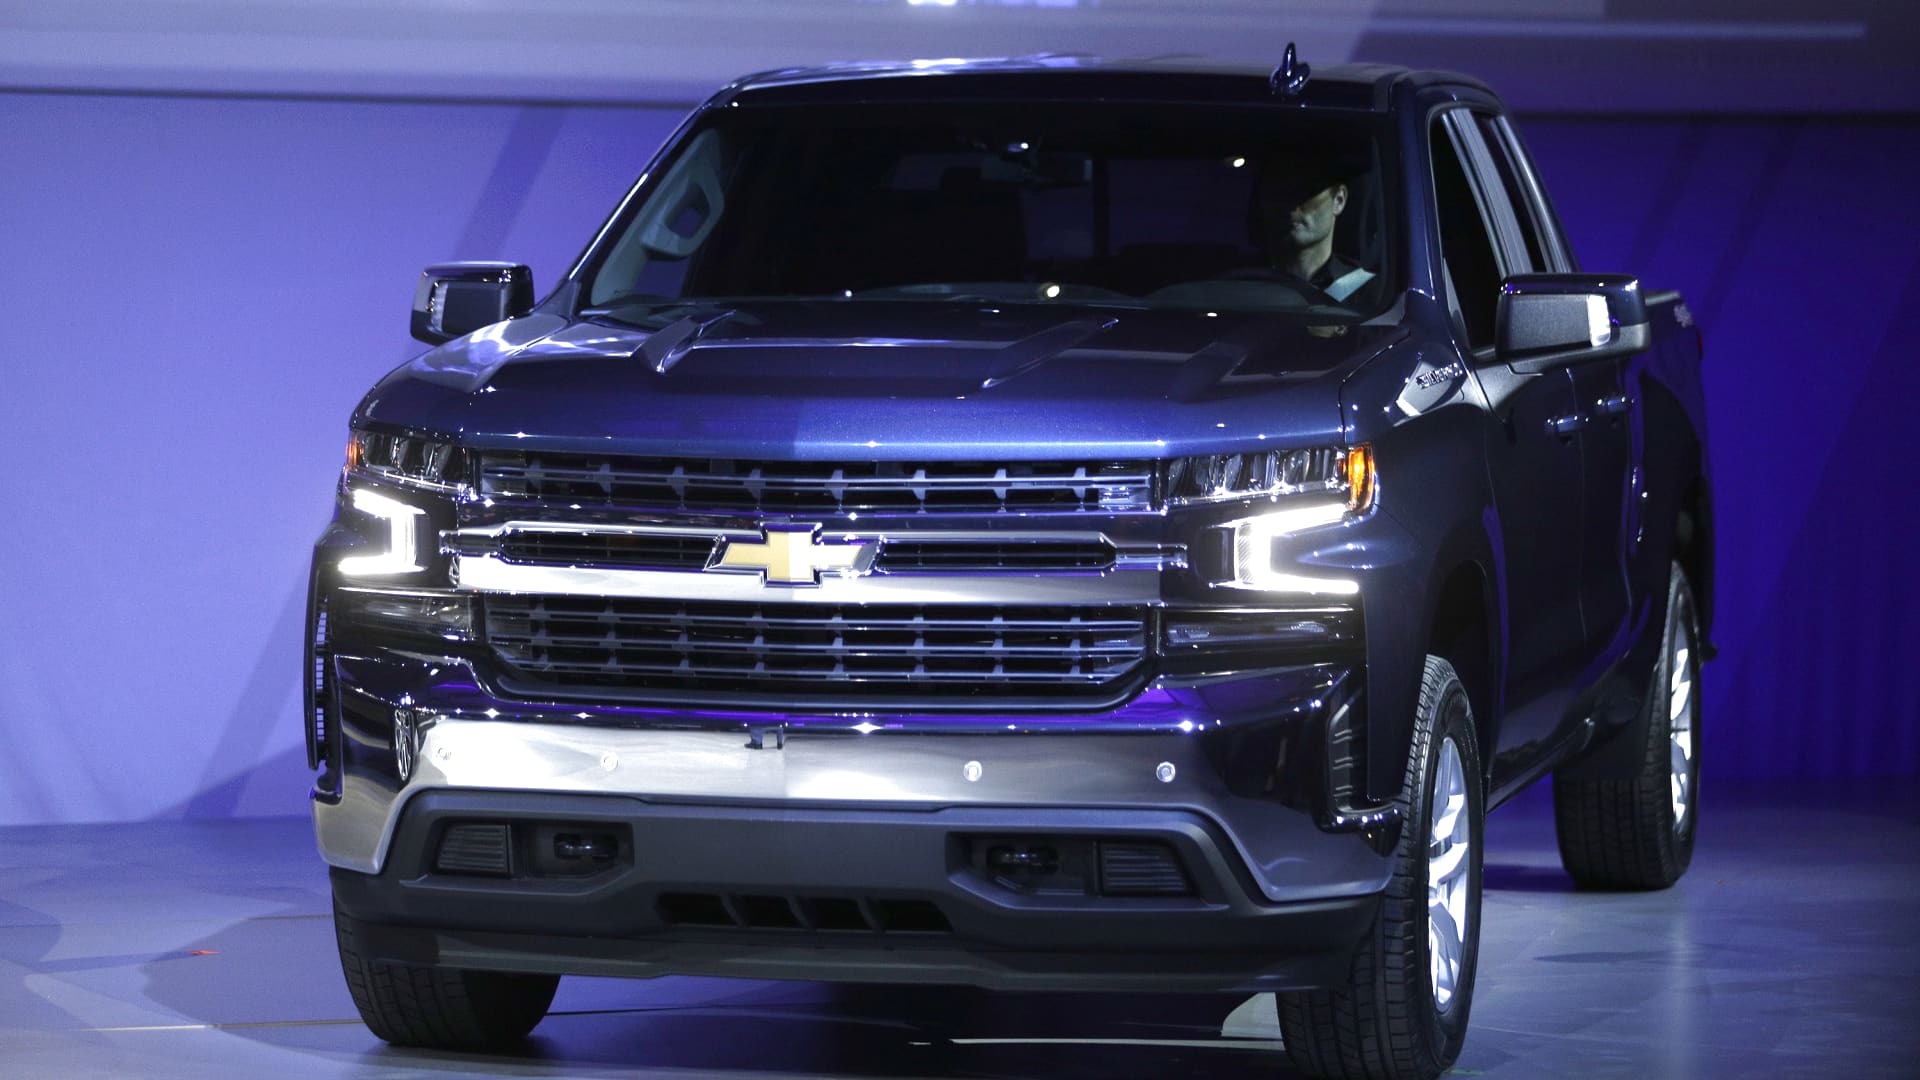 The new 2019 Chevrolet Silverado 1500 makes its official debut at the 2018 North American International Auto Show January 13, 2018 in Detroit, Michigan.